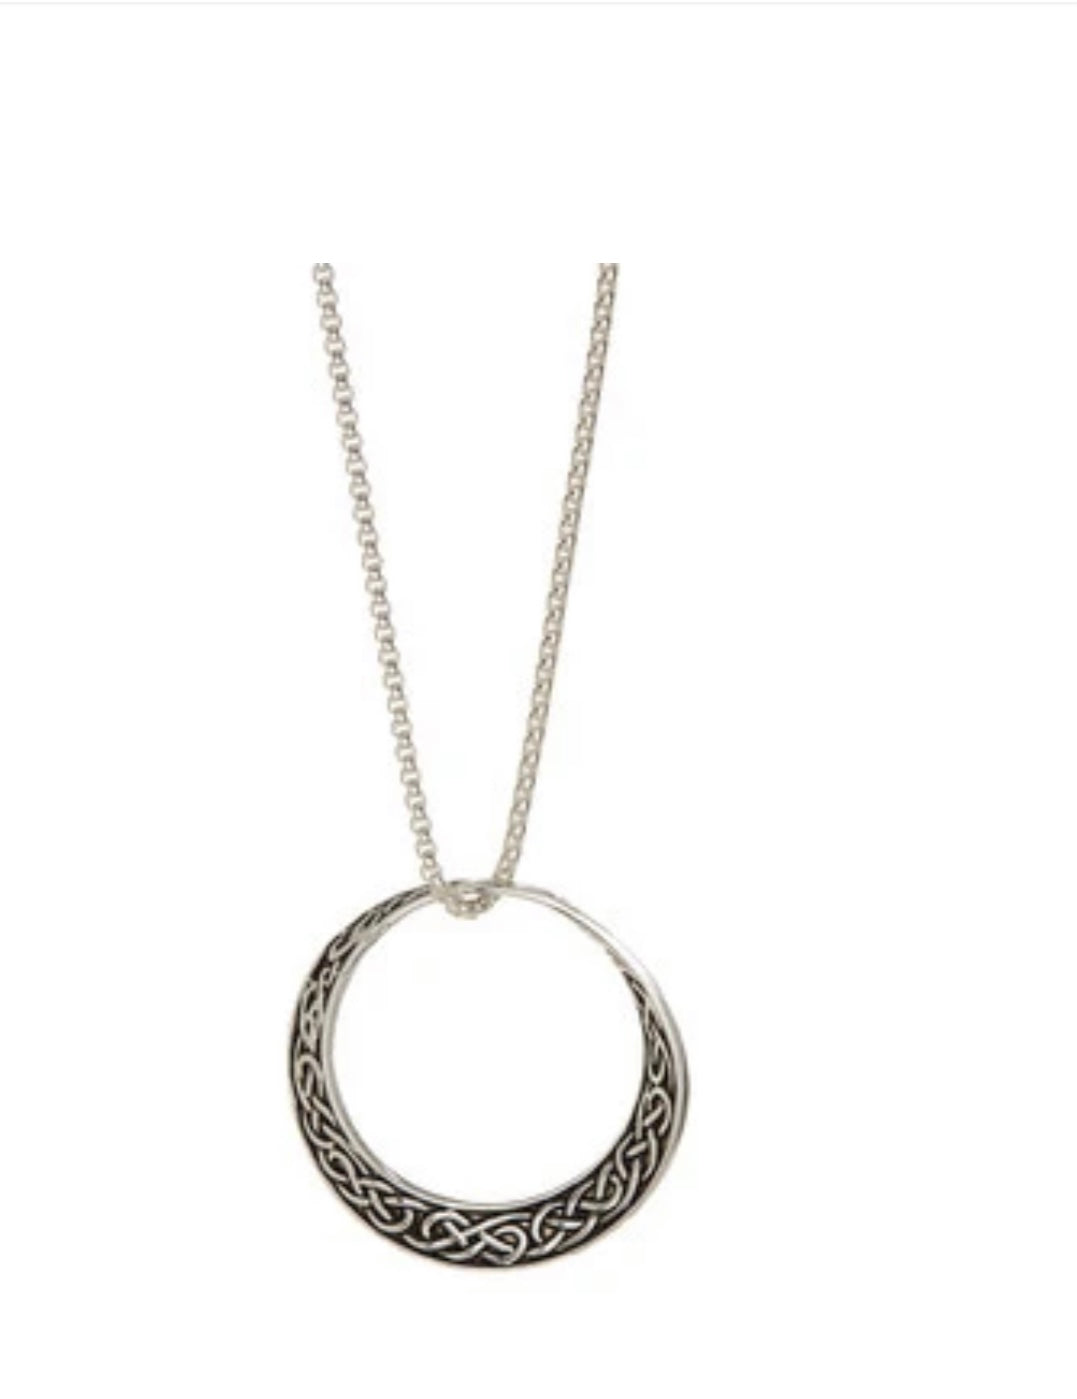 MOBIUS CELTIC INFINITY NECKLACE ttn2209